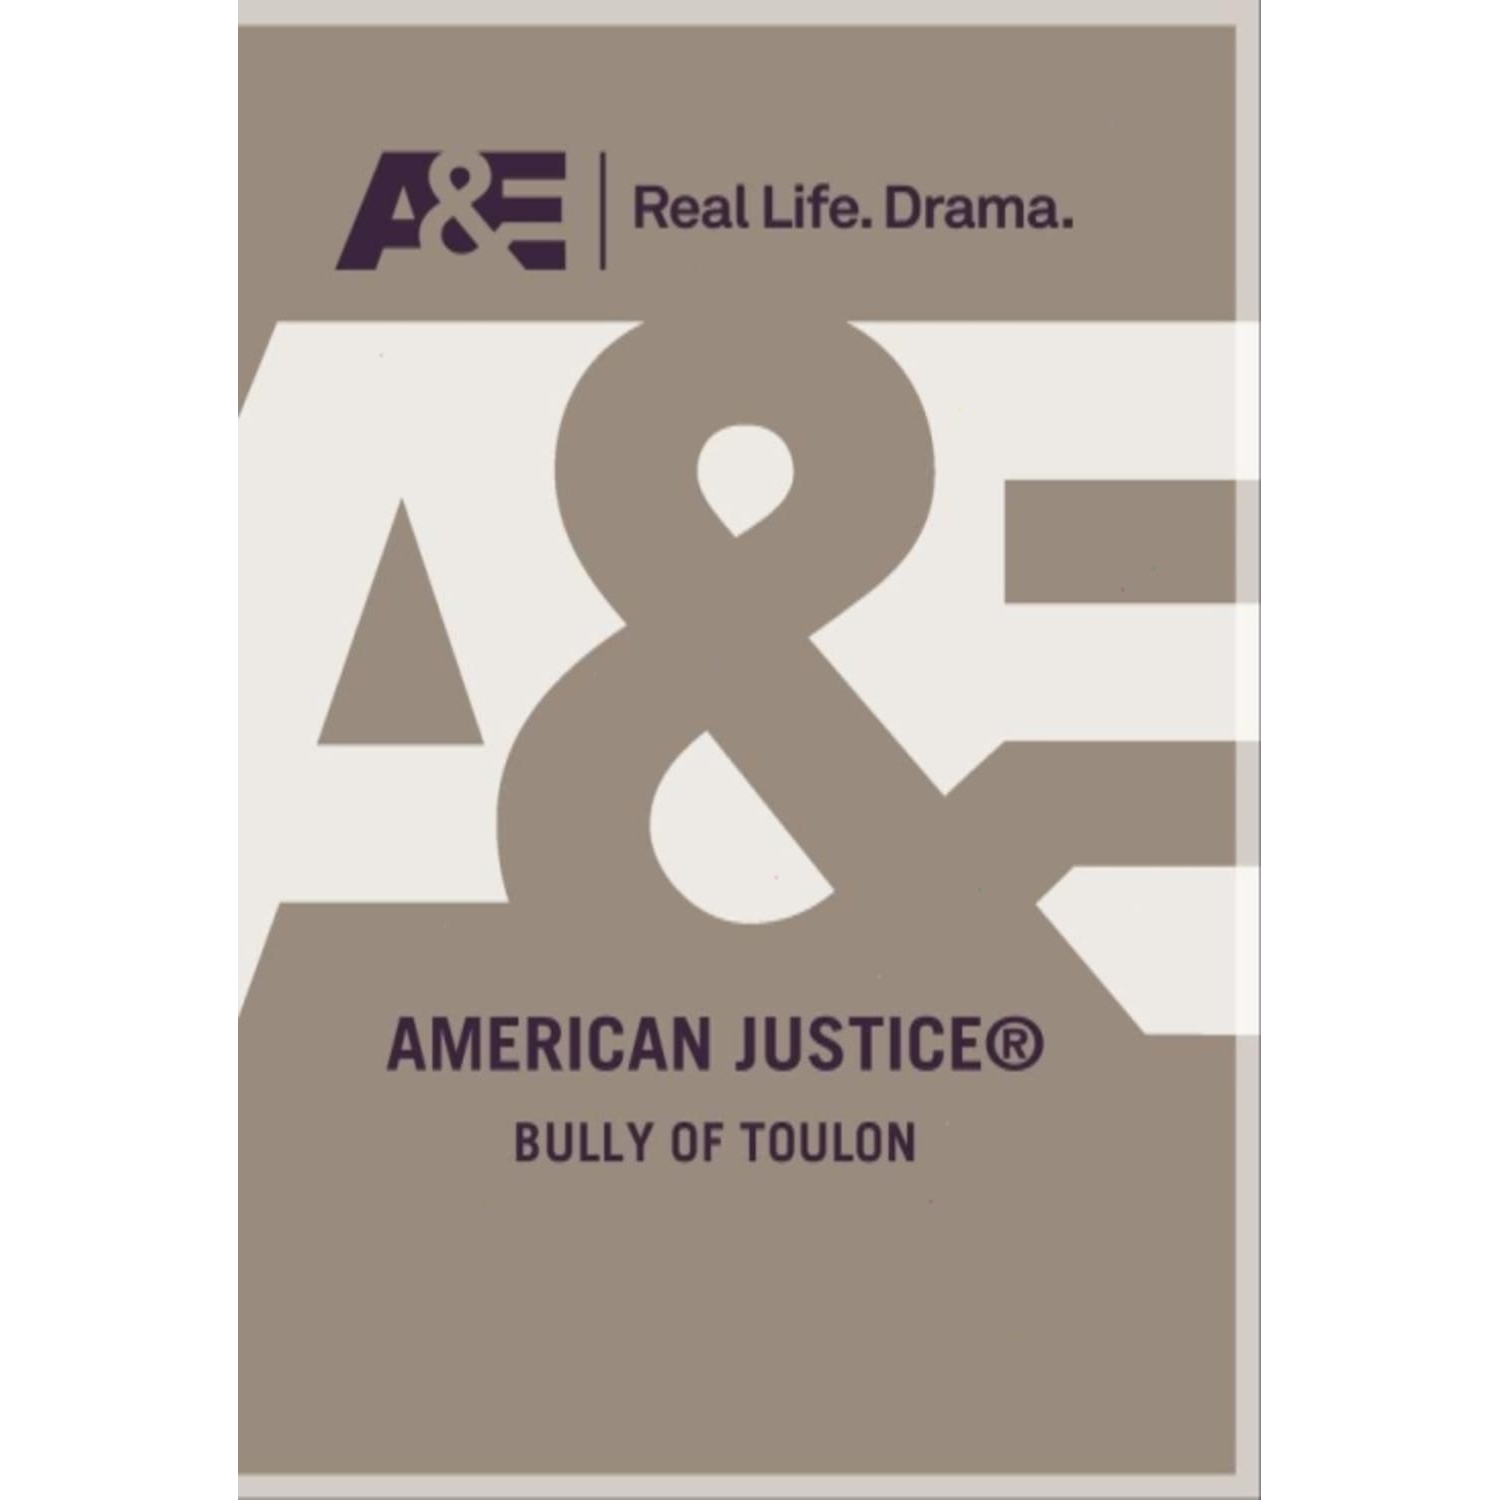 American Justice - He Bully of Toulon